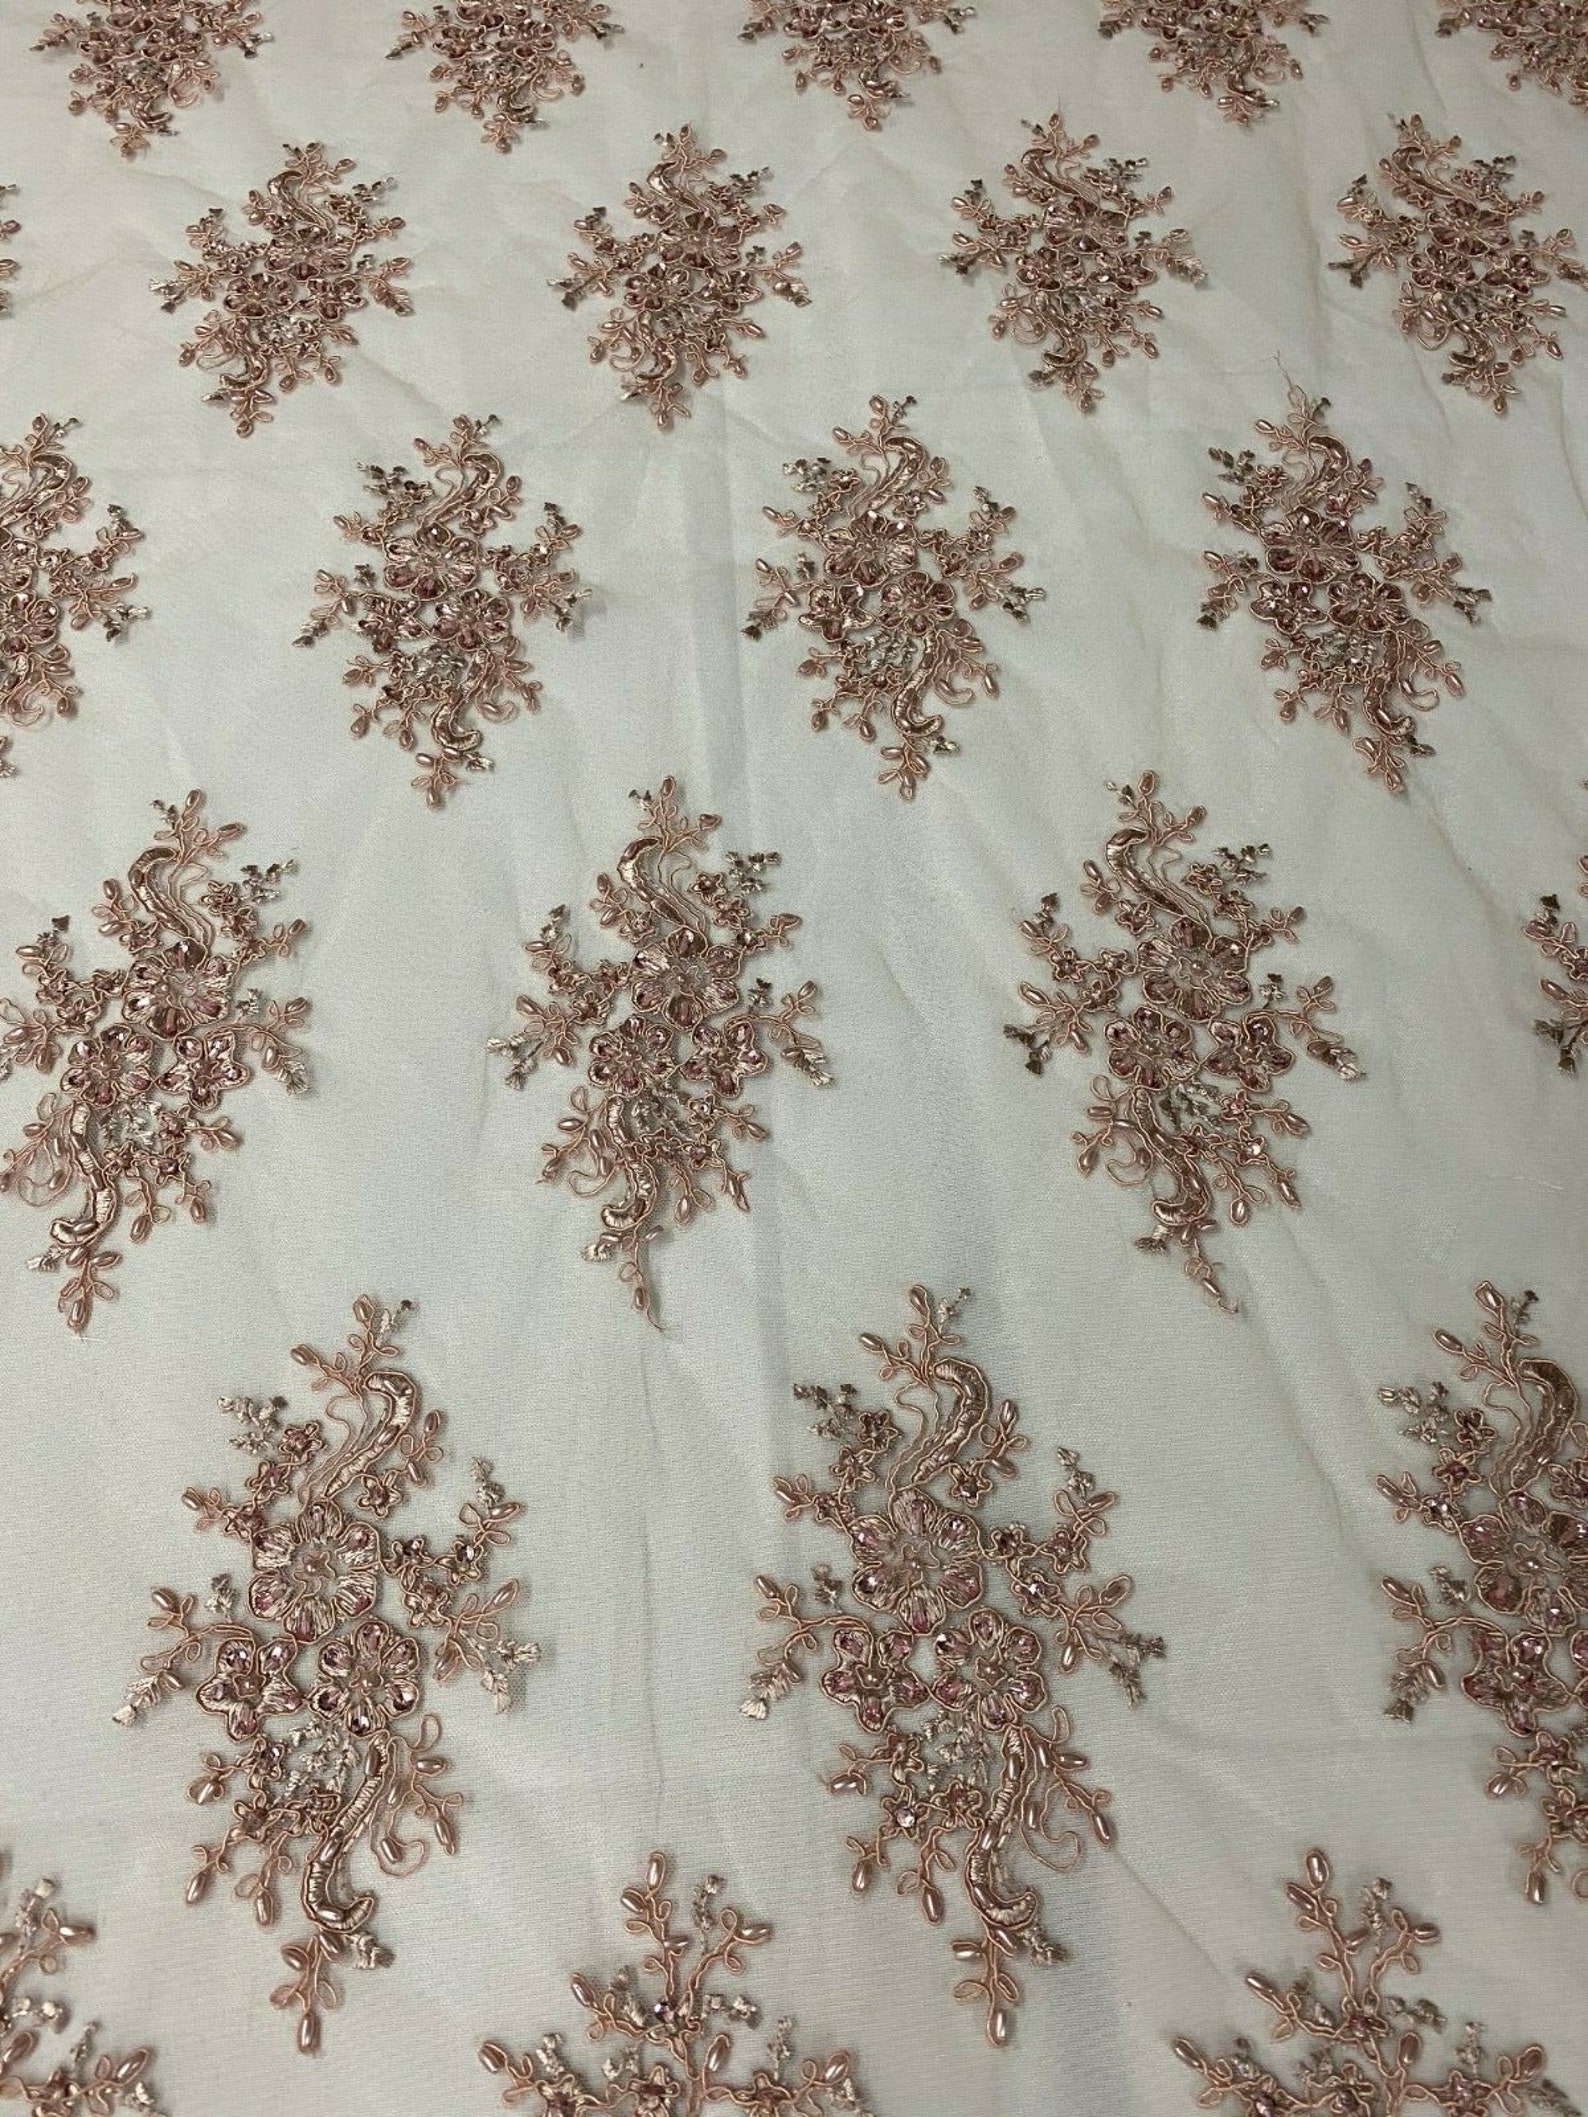 Blush Cluster Bead Fabric Embroidered Flower Beaded Fabric - Etsy